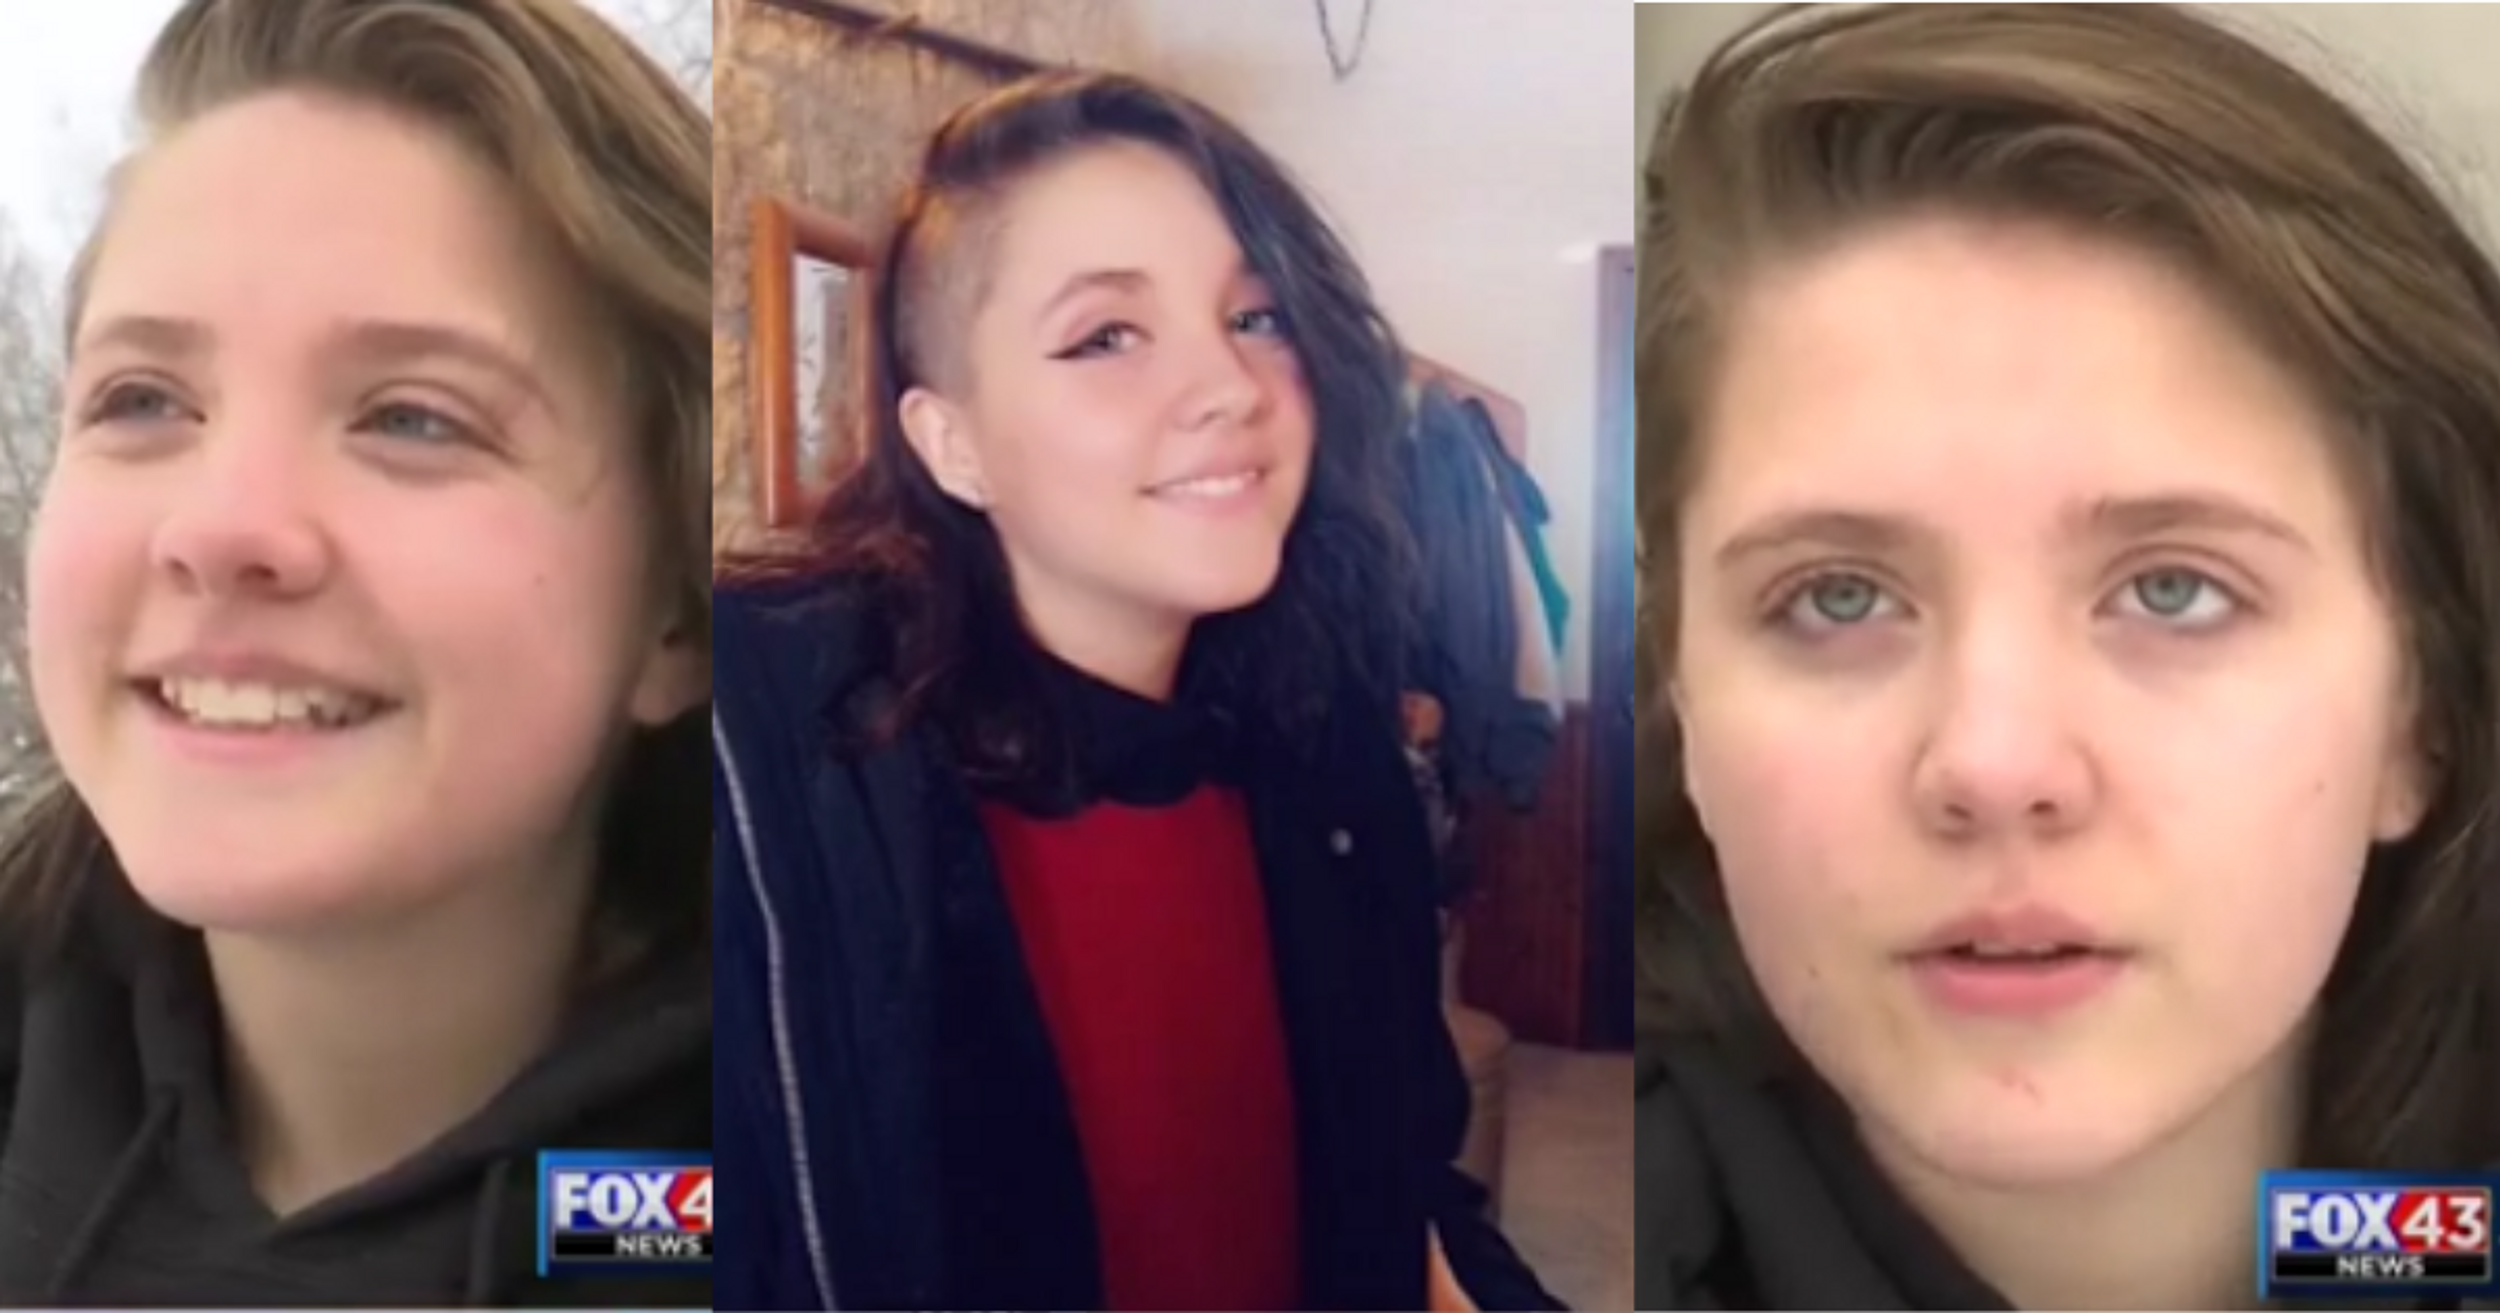 Kansas 13-Year-Old Kicked Off School Bus By Driver For Telling Her Friend 'I'm A Lesbian'